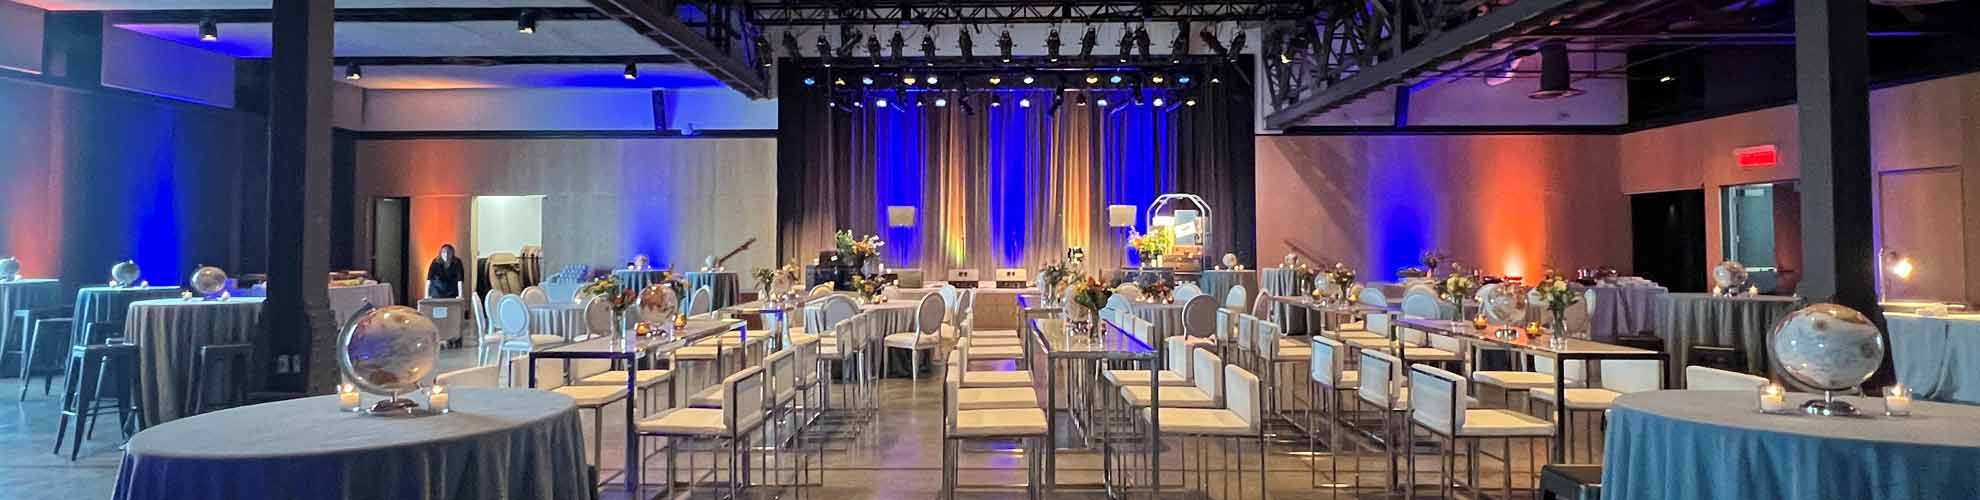 Tall clear bar tables and cruiser tables with blue linens have white bar stools for seating. The tables are decorated with blue linens, globe centerpiece and bud vases facing a stage with blue up lights.